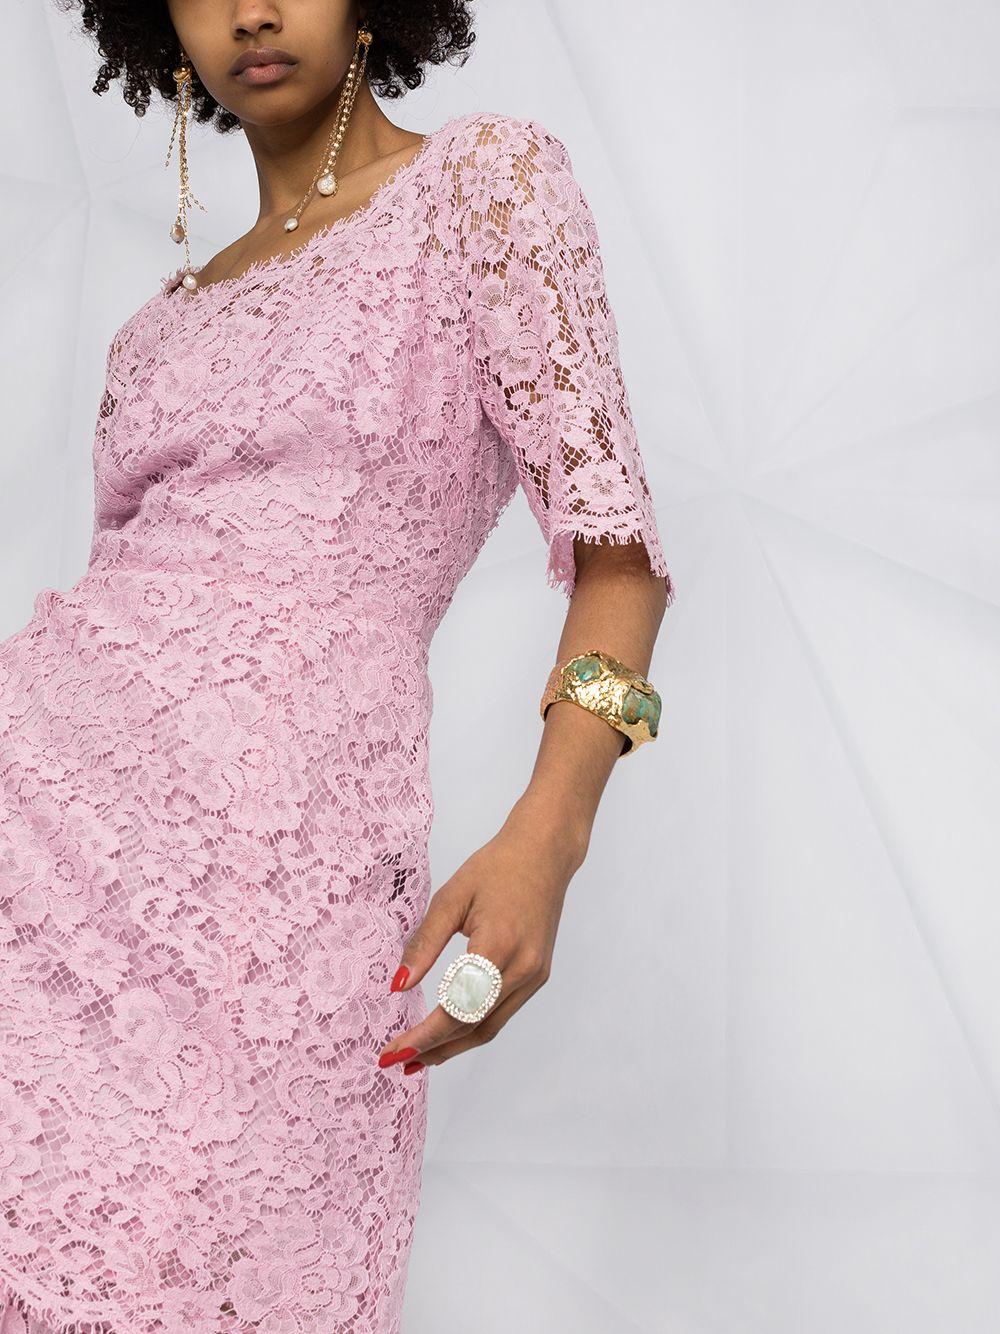 Dolce & Gabbana Lace-overlay Short-sleeve Dress in Pink | Lyst